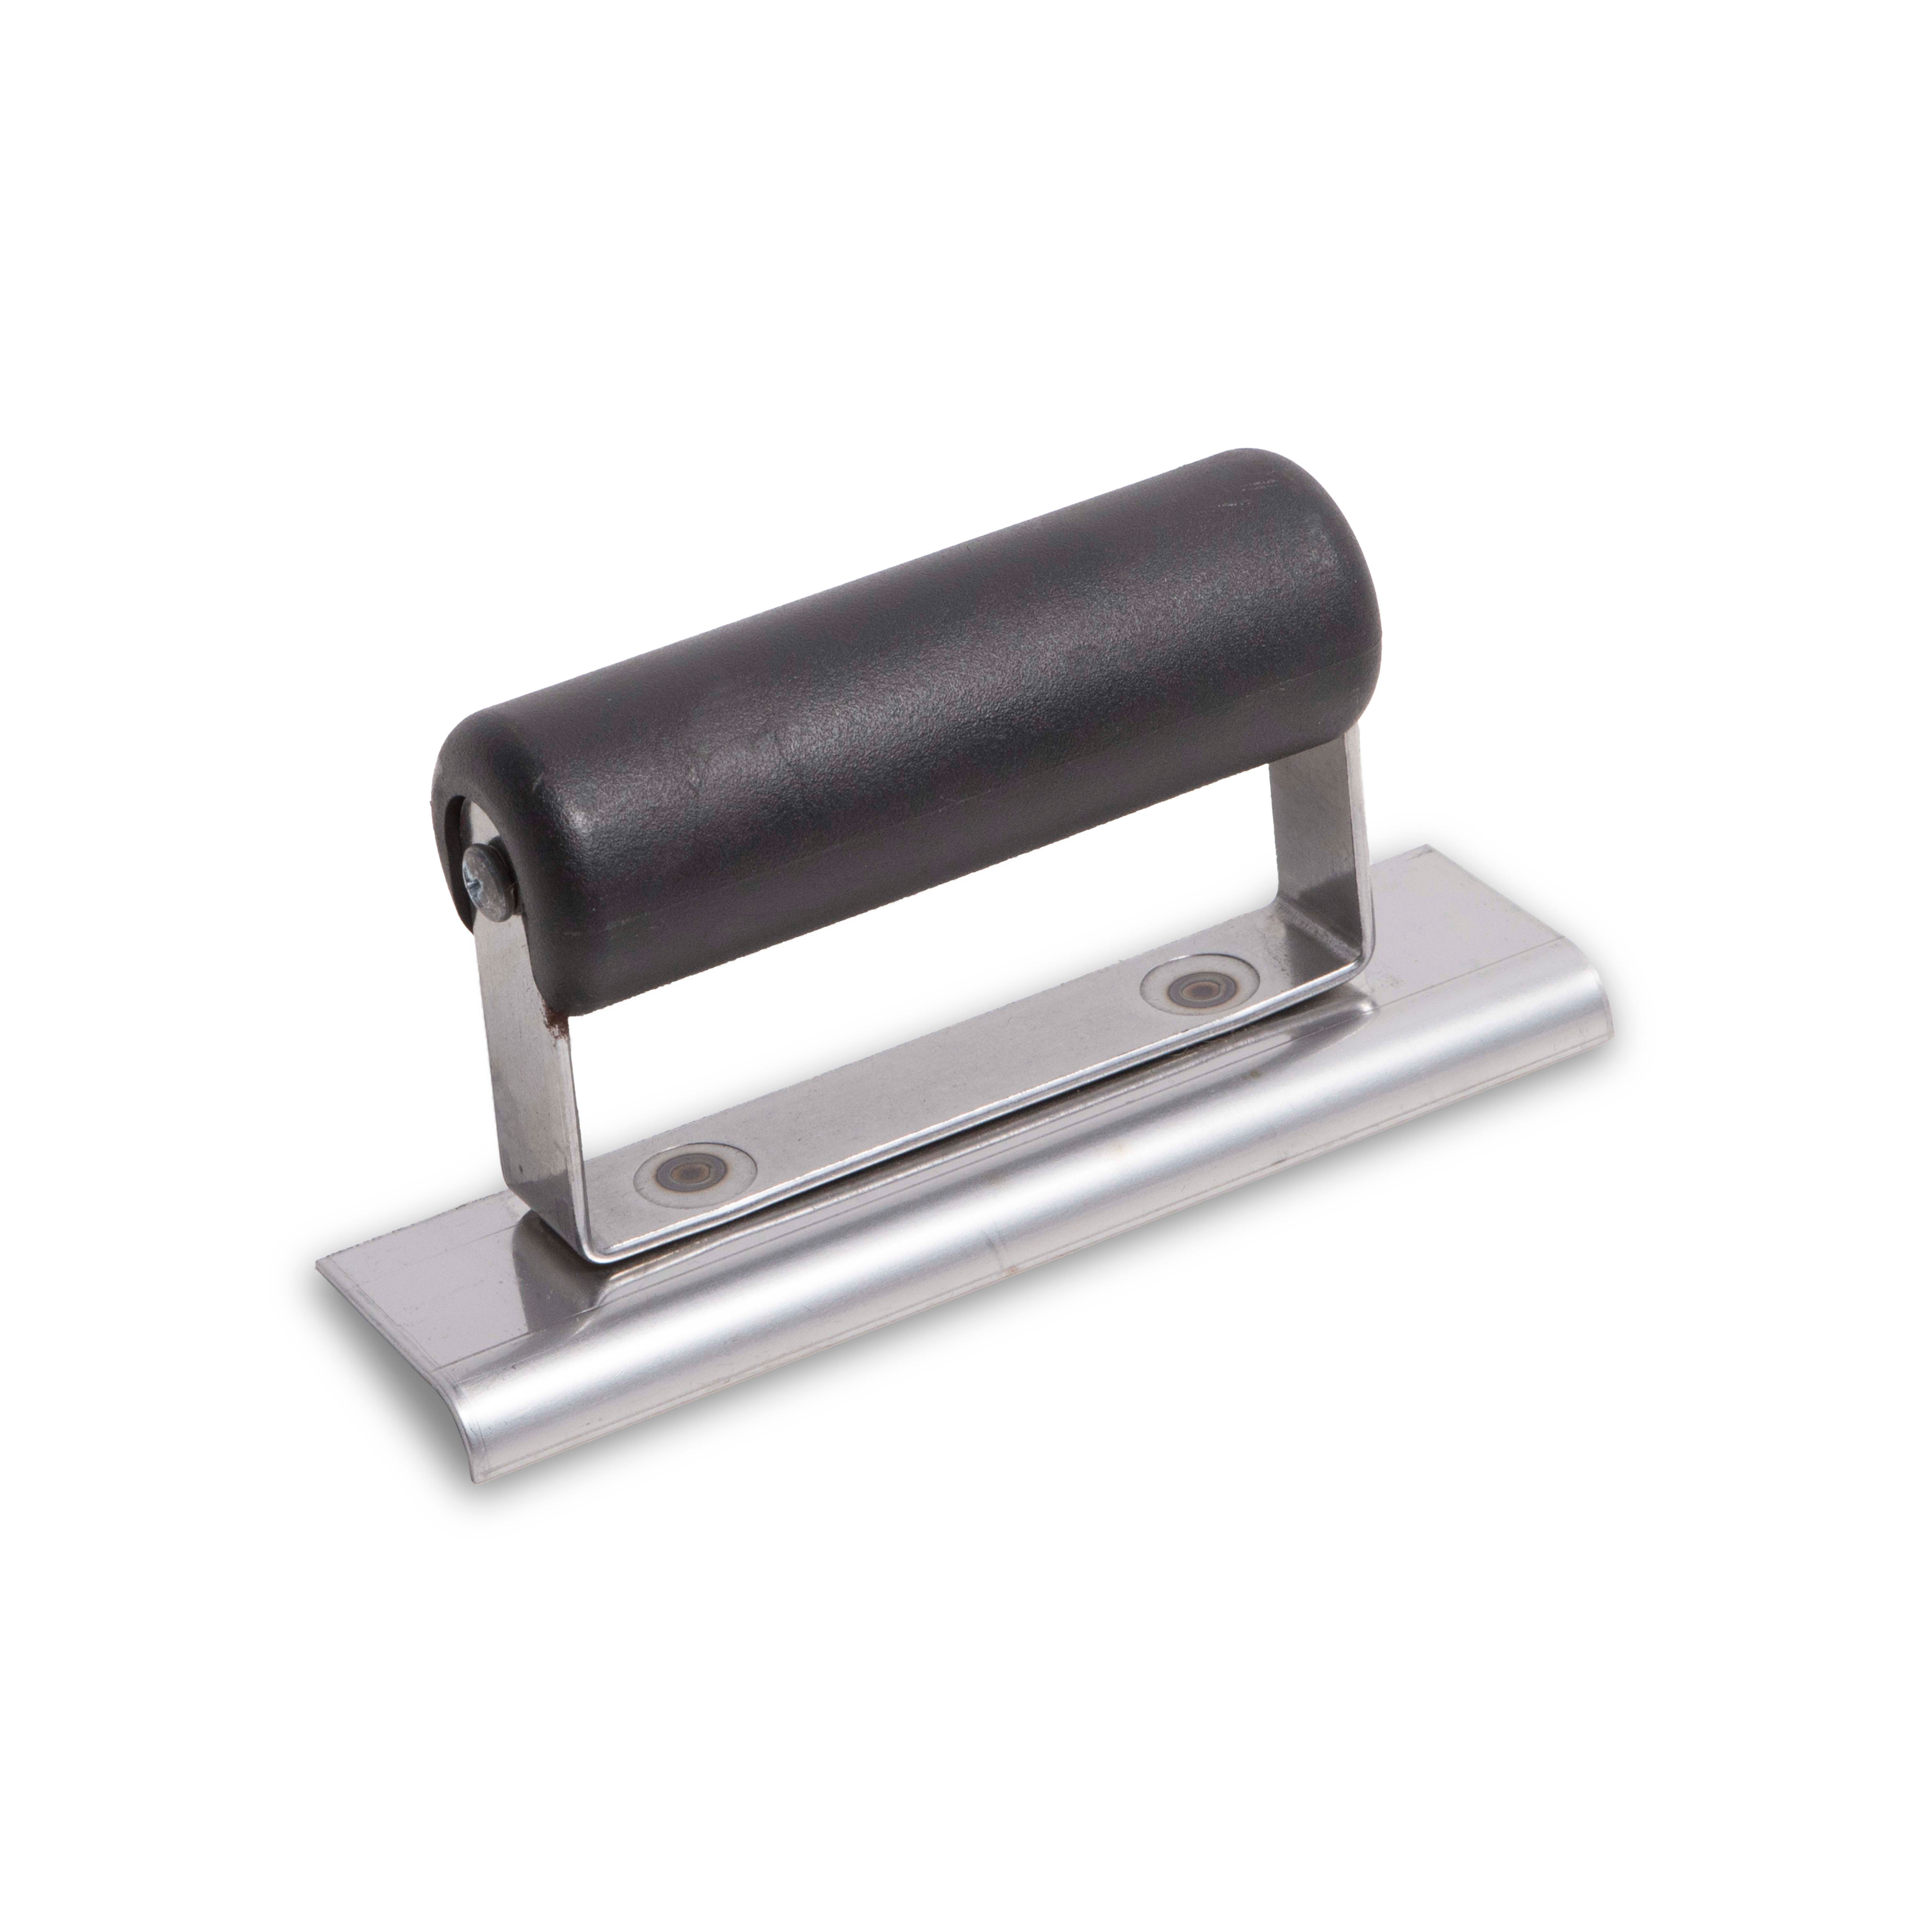 Marshalltown - QLT CE501SP 6in x 2in Stainless Steel Edger; 3/8R, 1/2L-Plastic Handle CE501SP